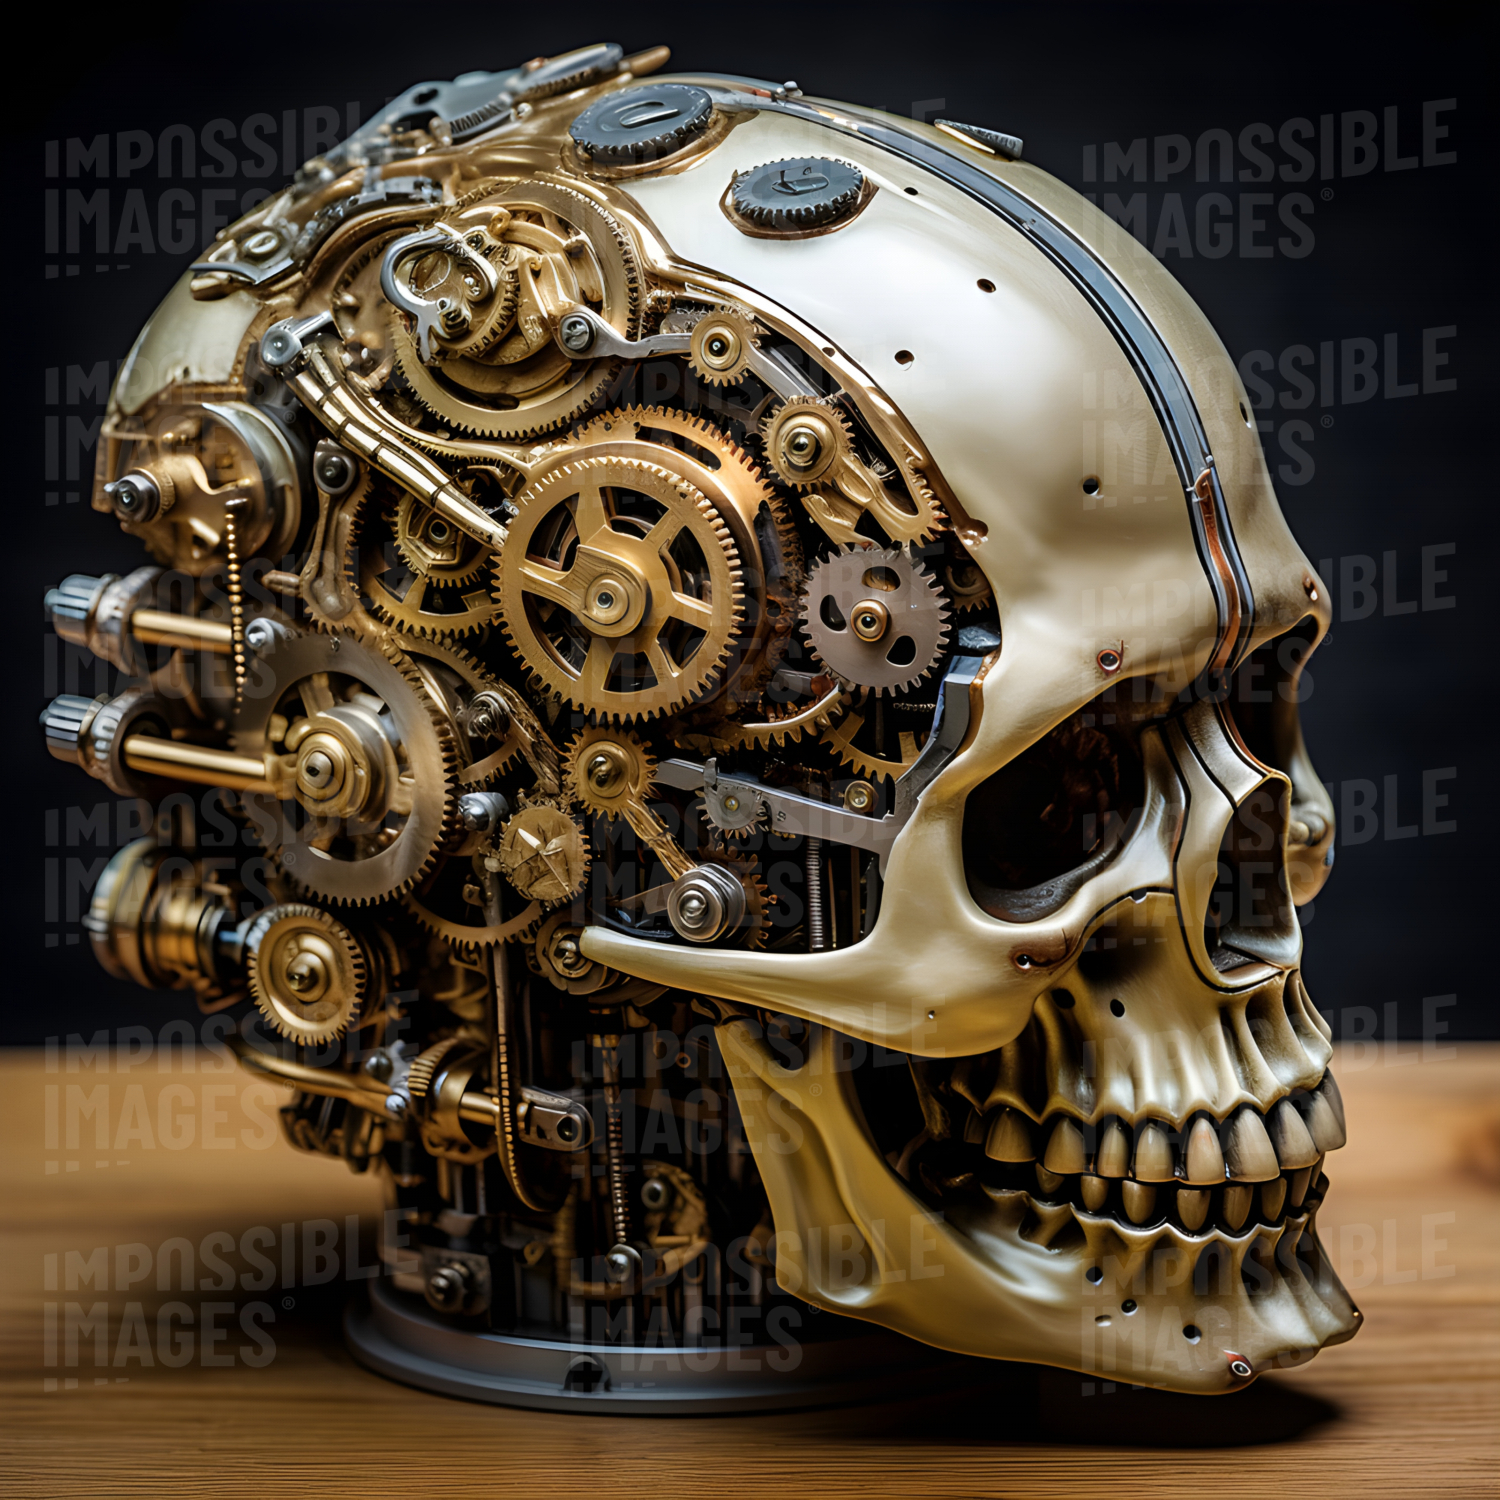 Ornate model of a stylised human skull with complex clockwork inside -  An intricately crafted model of a stylised human skull, with a complex clockwork mechanism inside, intricately designed with ornate details.